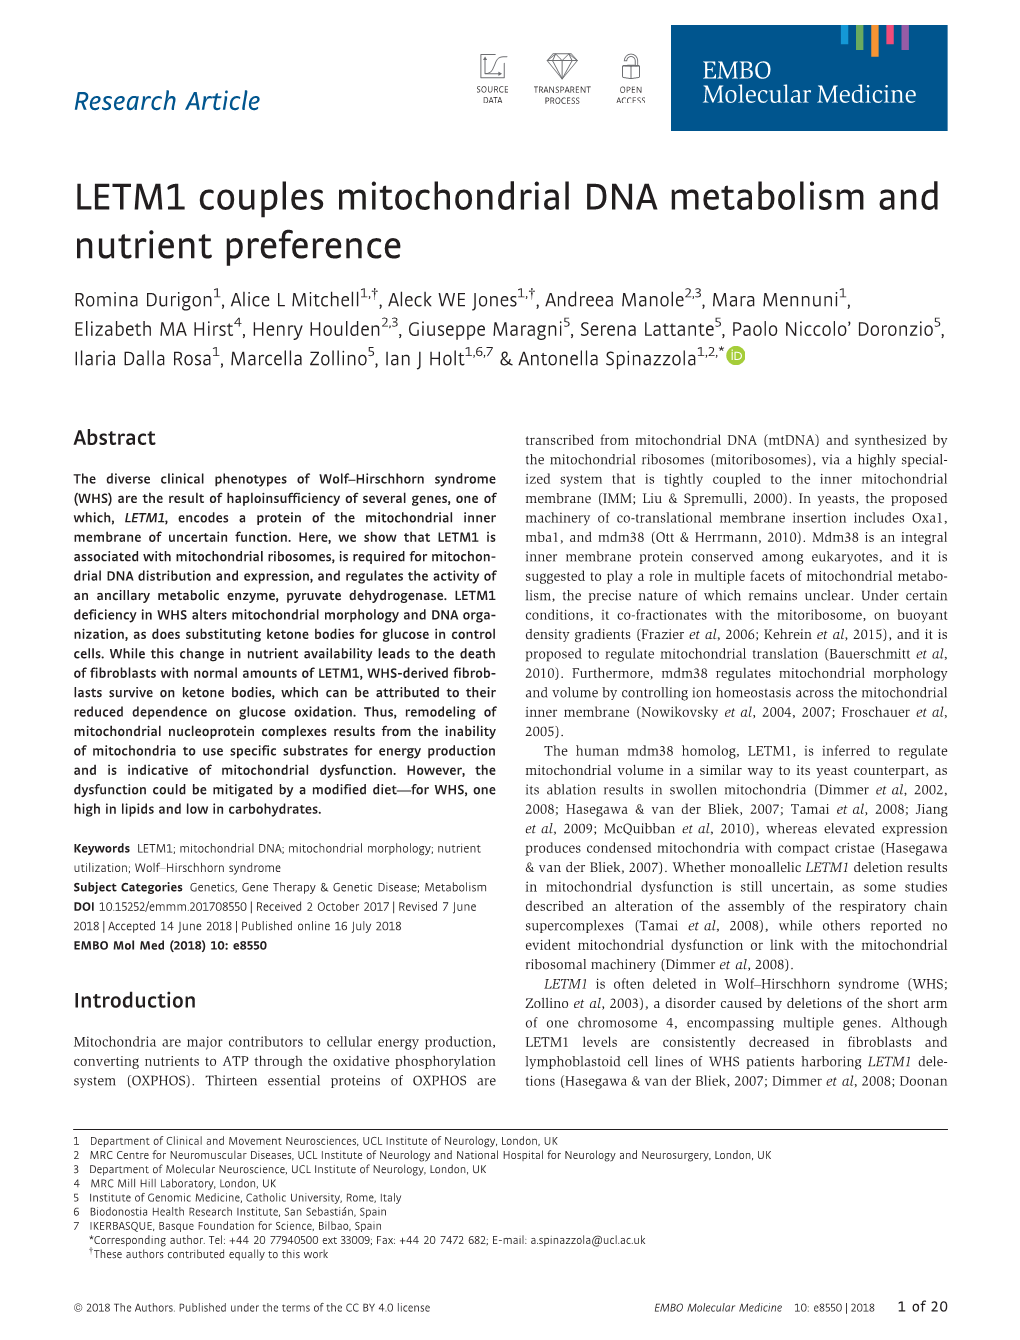 LETM1 Couples Mitochondrial DNA Metabolism and Nutrient Preference